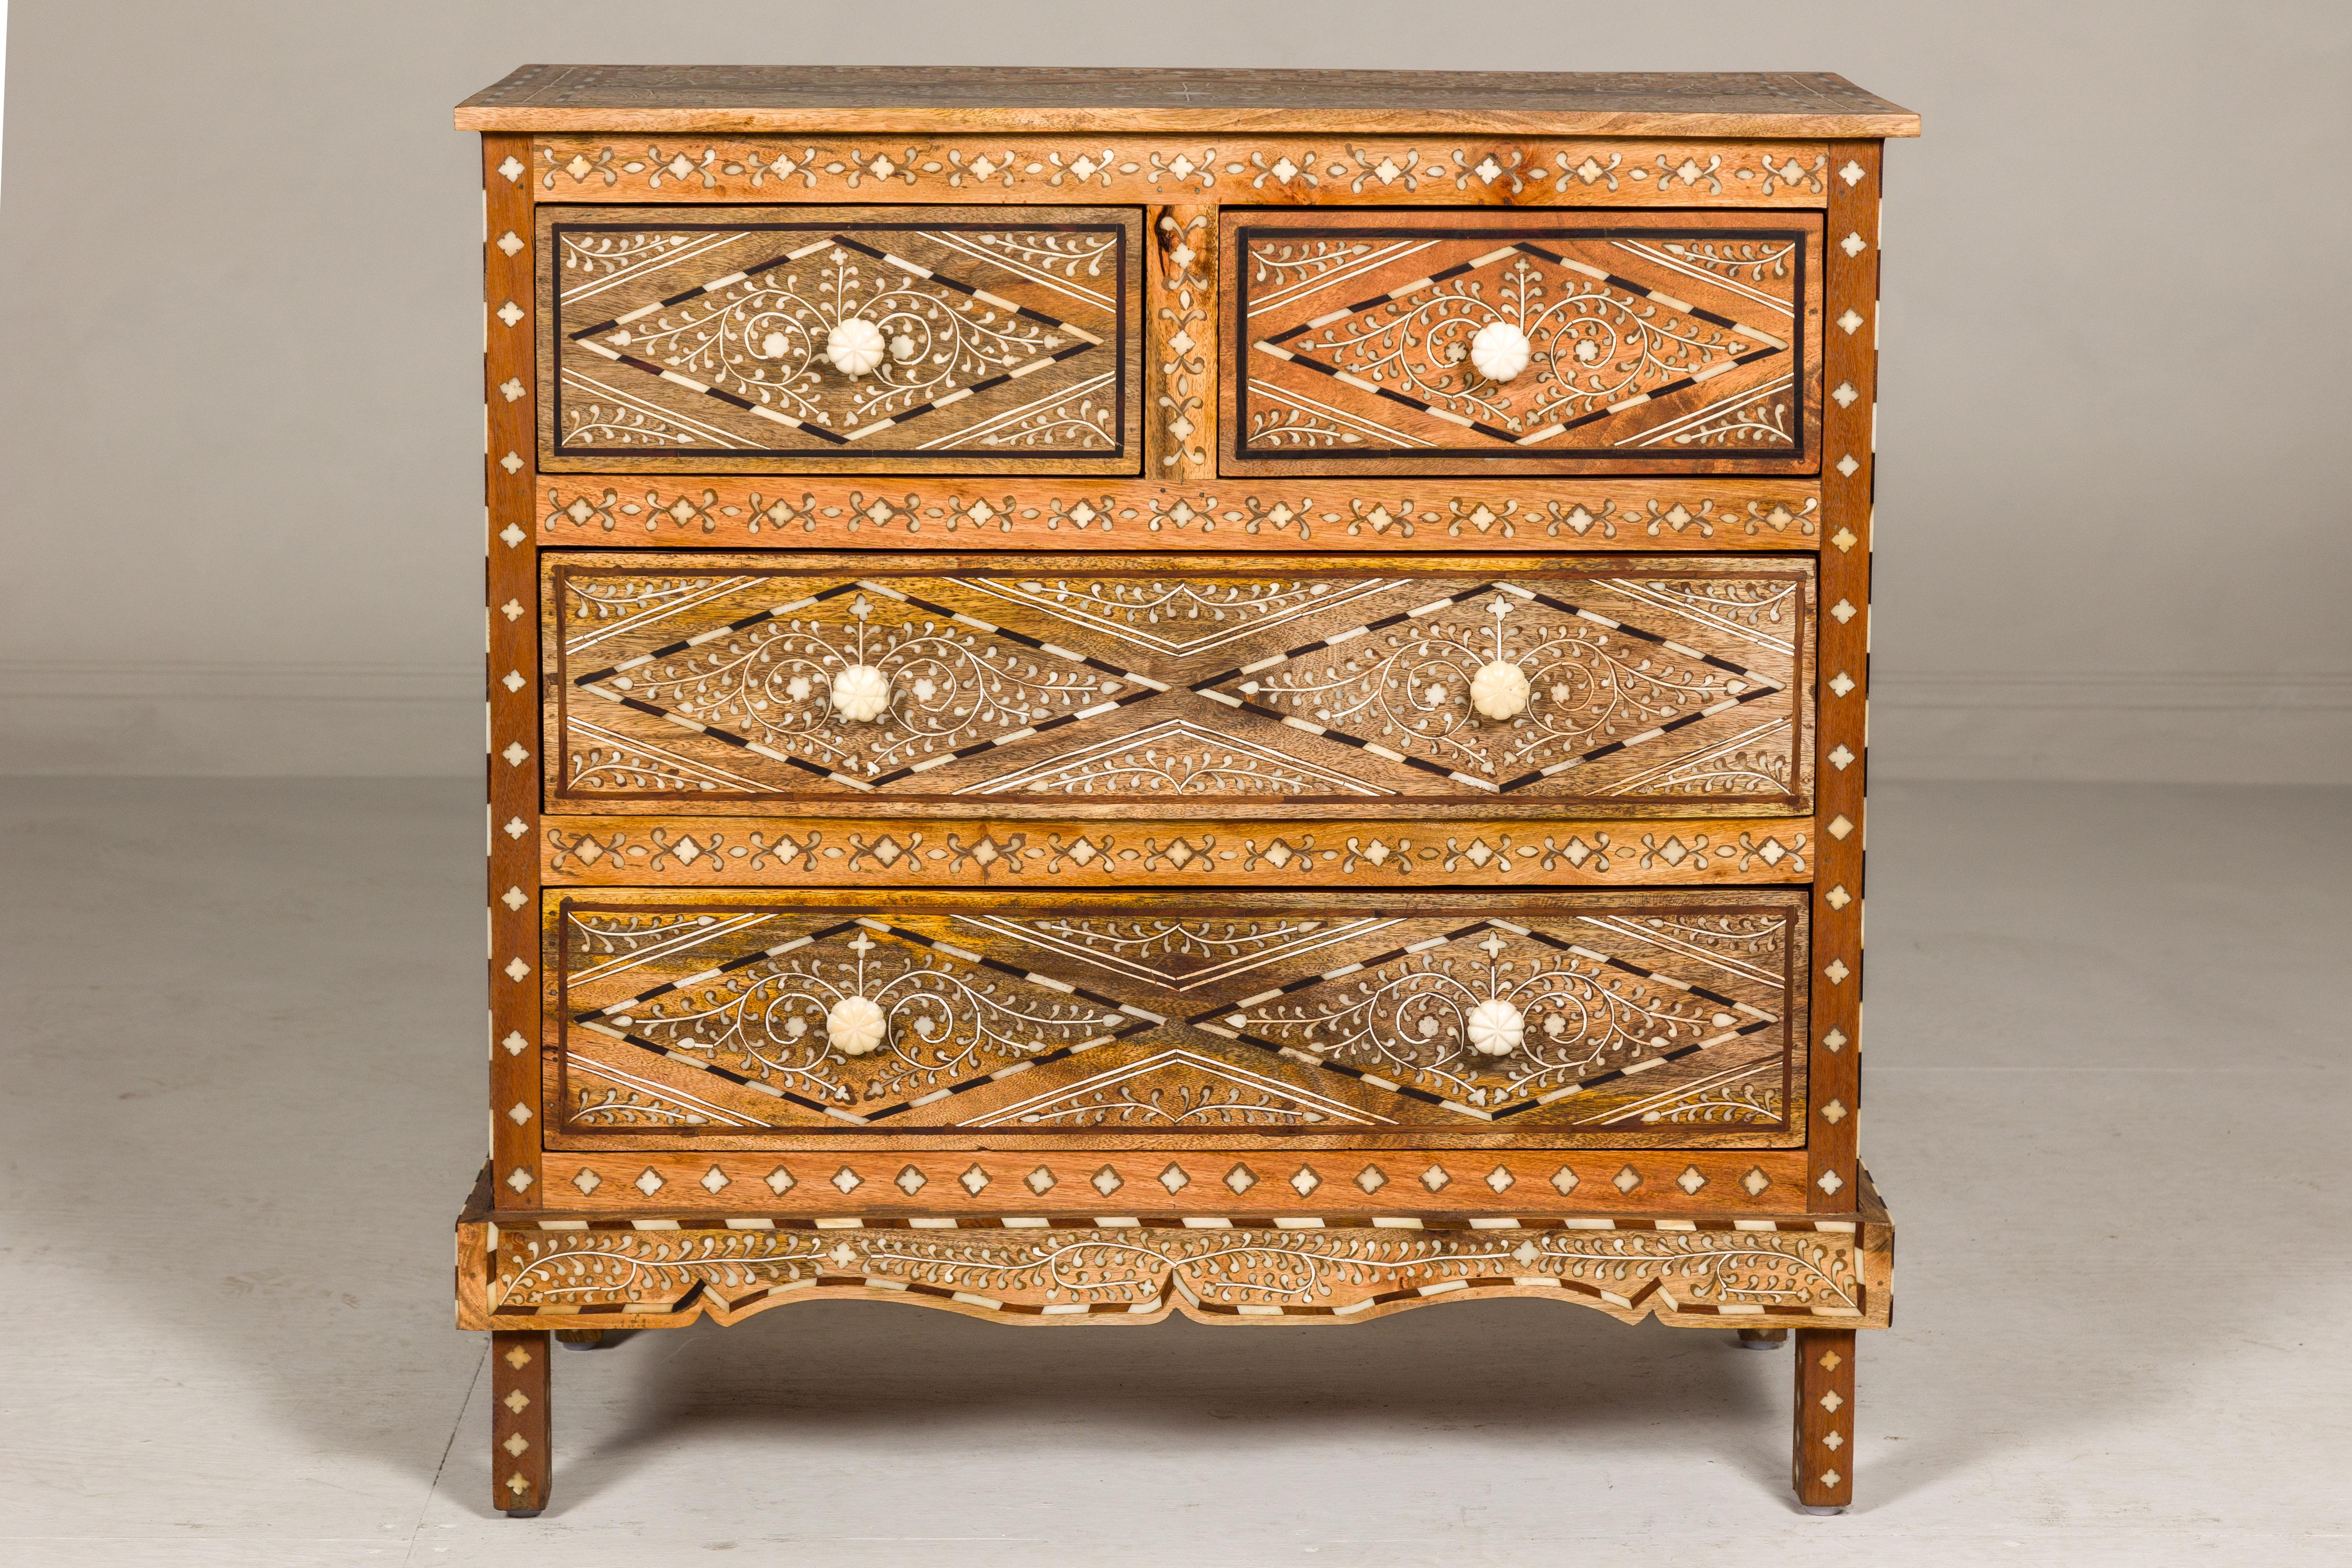 An Anglo-Indian style four-drawer chest with foliage-themed bone inlaid décor. With a design as intricate as a sonnet, this Anglo-Indian style four-drawer chest breathes life into any space it occupies. Crowned by an artfully inlaid top and swathed